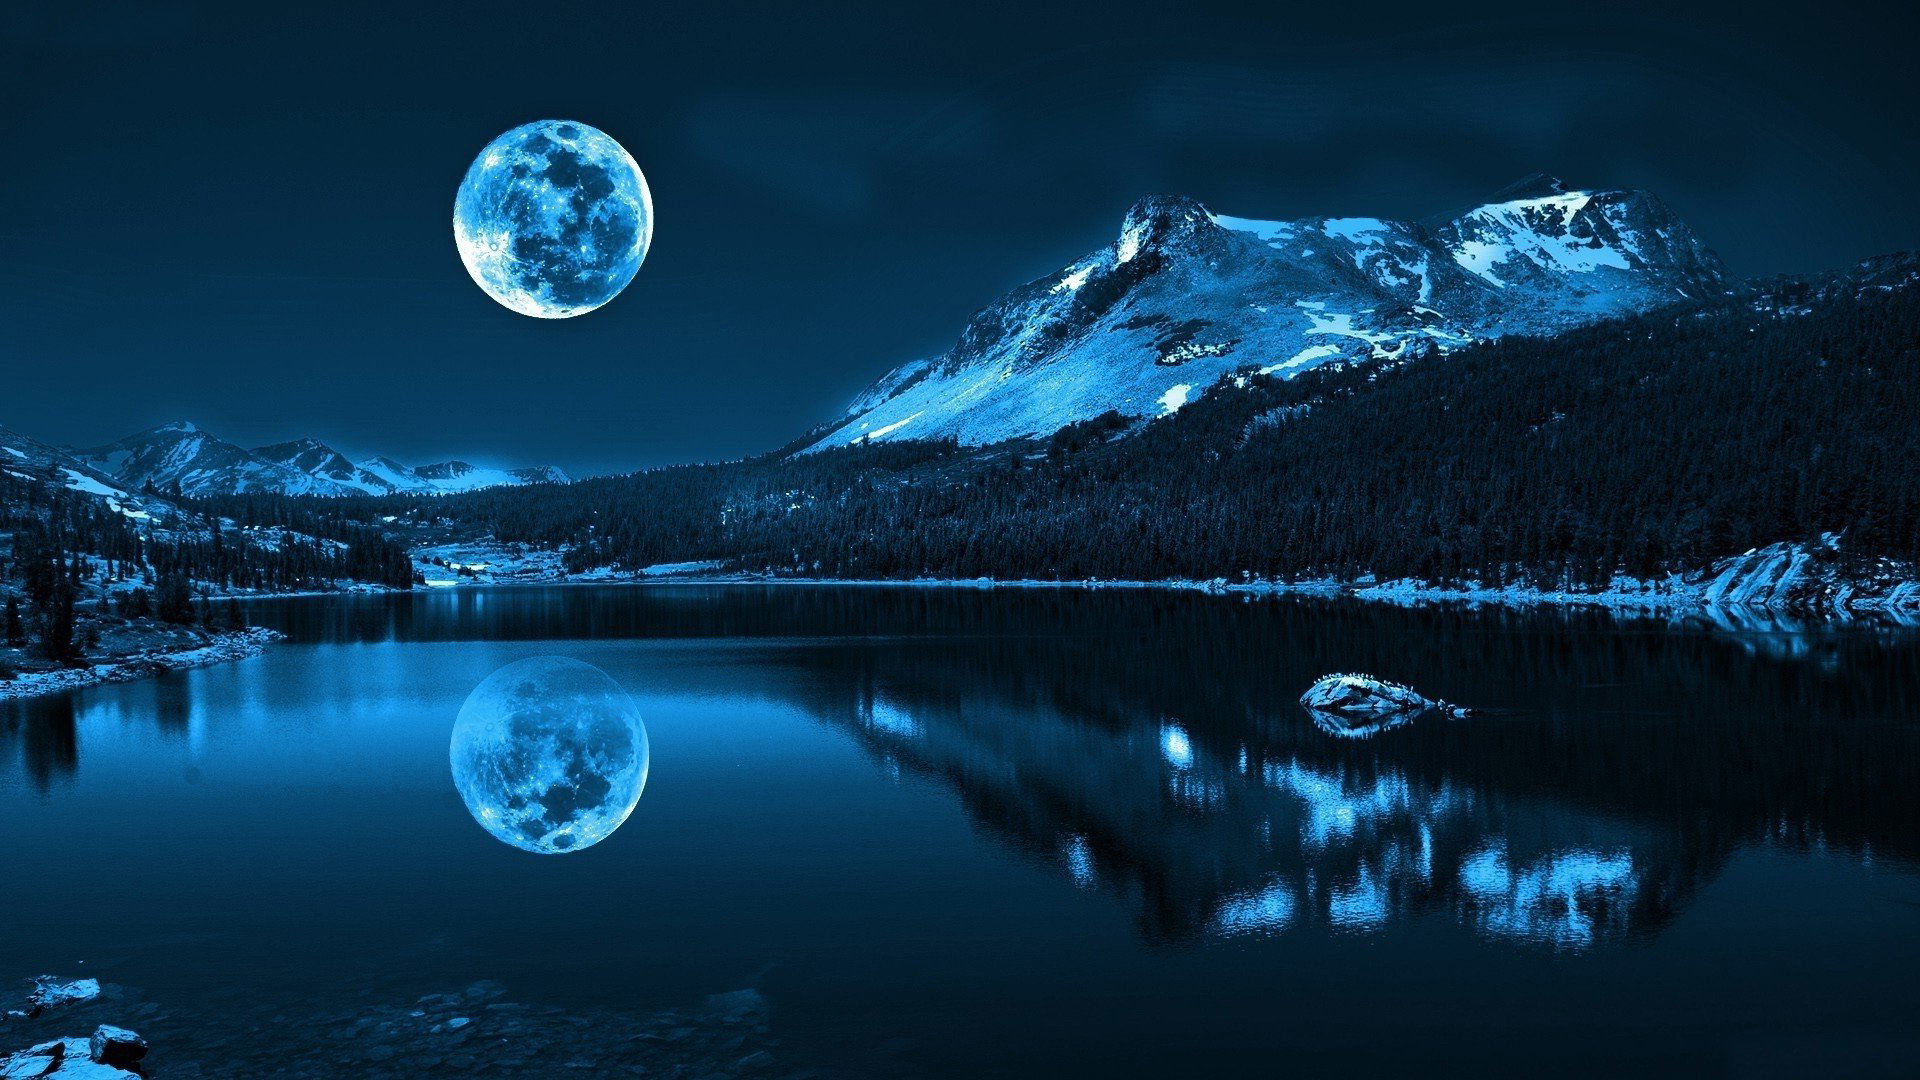 Night in the mountains Wallpaper 4k Ultra HD ID11076